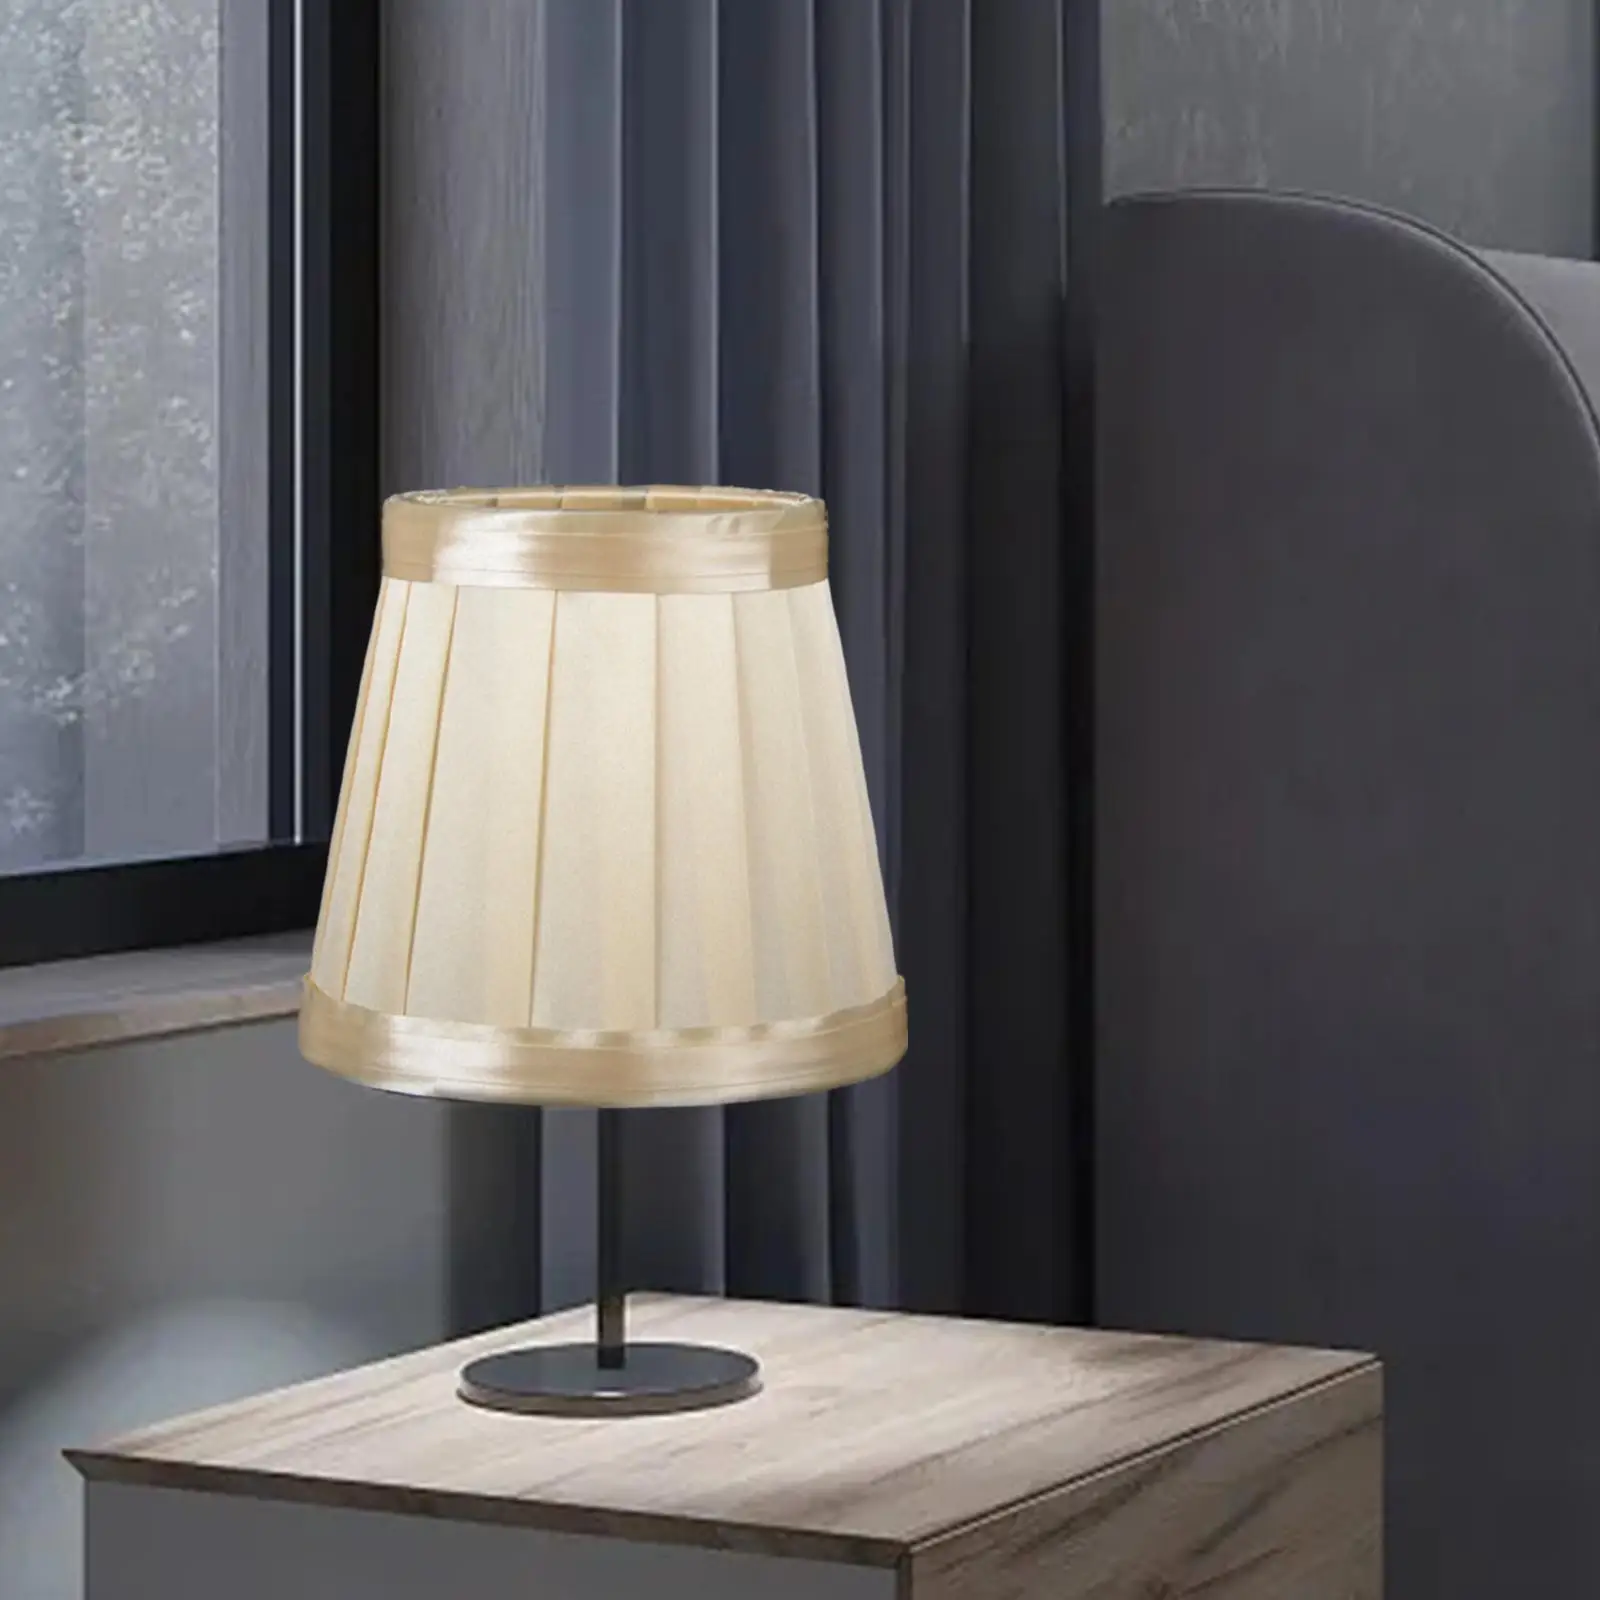 Table Lamp Shade Cover Replacement Cloth Lampshade Durable Elegant Convenient Assemble Versatile Pleated Designed for Bedroom